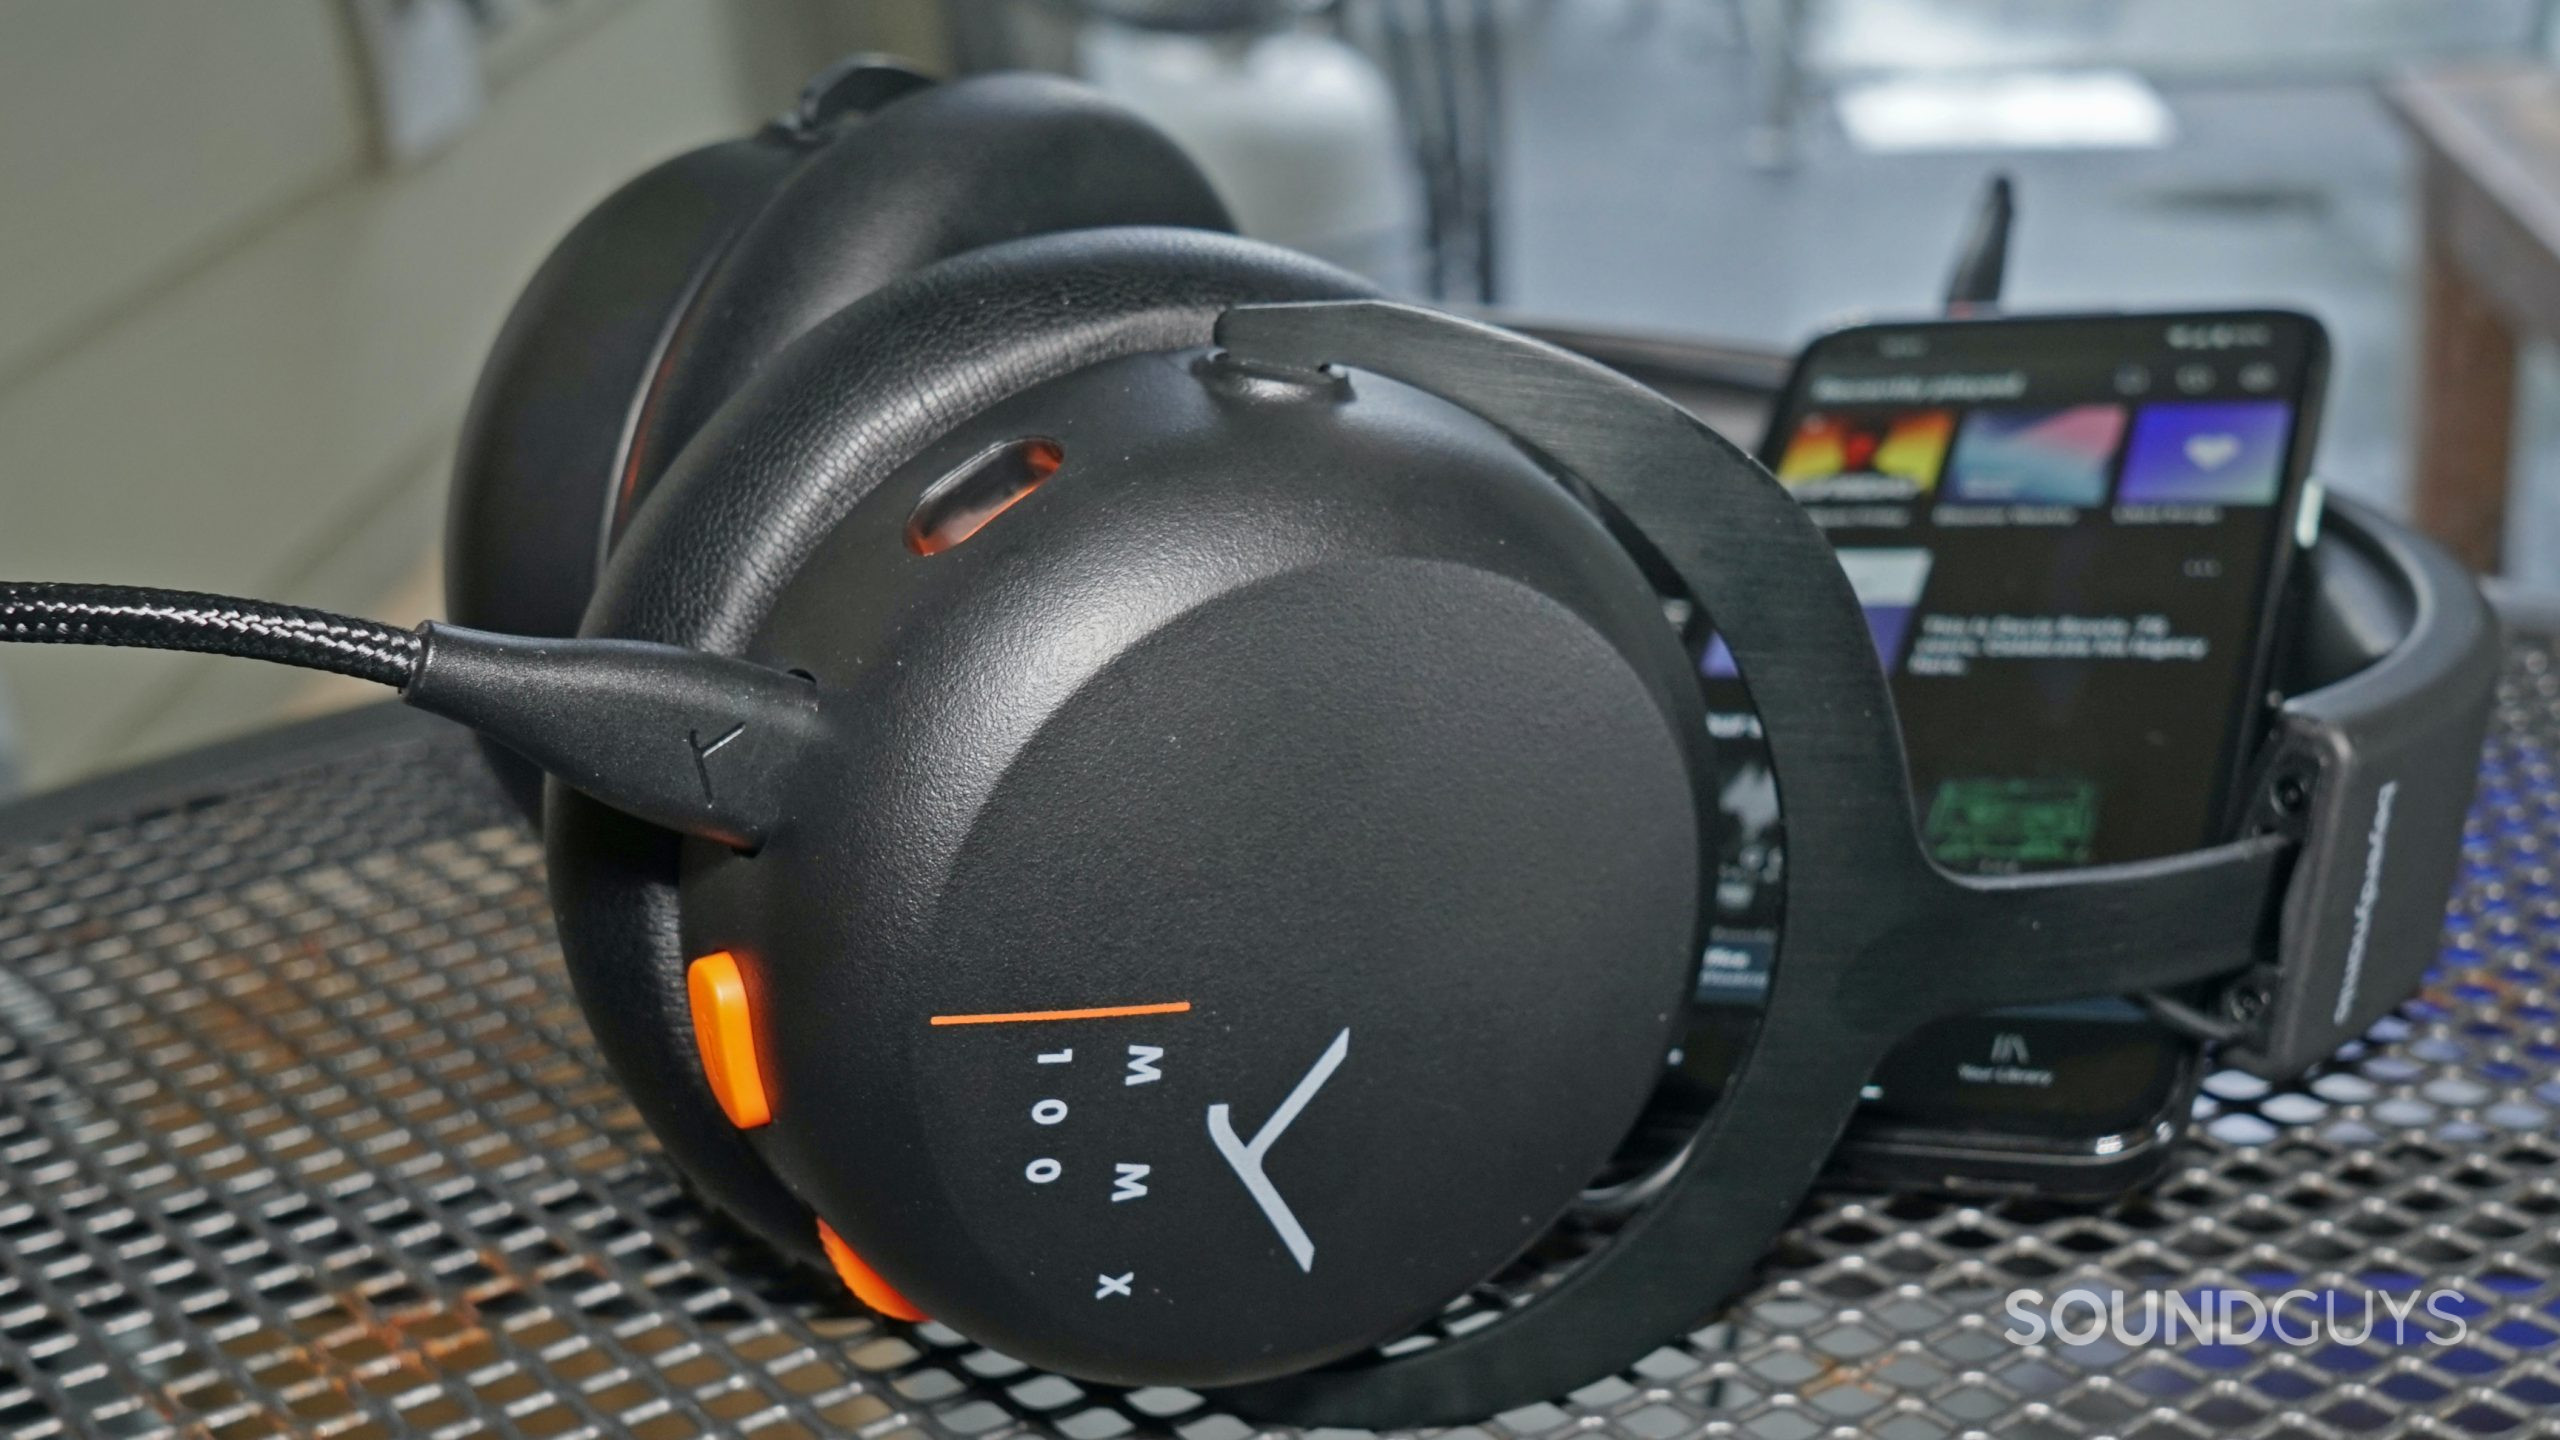 The Beyerdynamic MMX 100 gaming headset lays on a metal table next to a Google Pixel 4a.